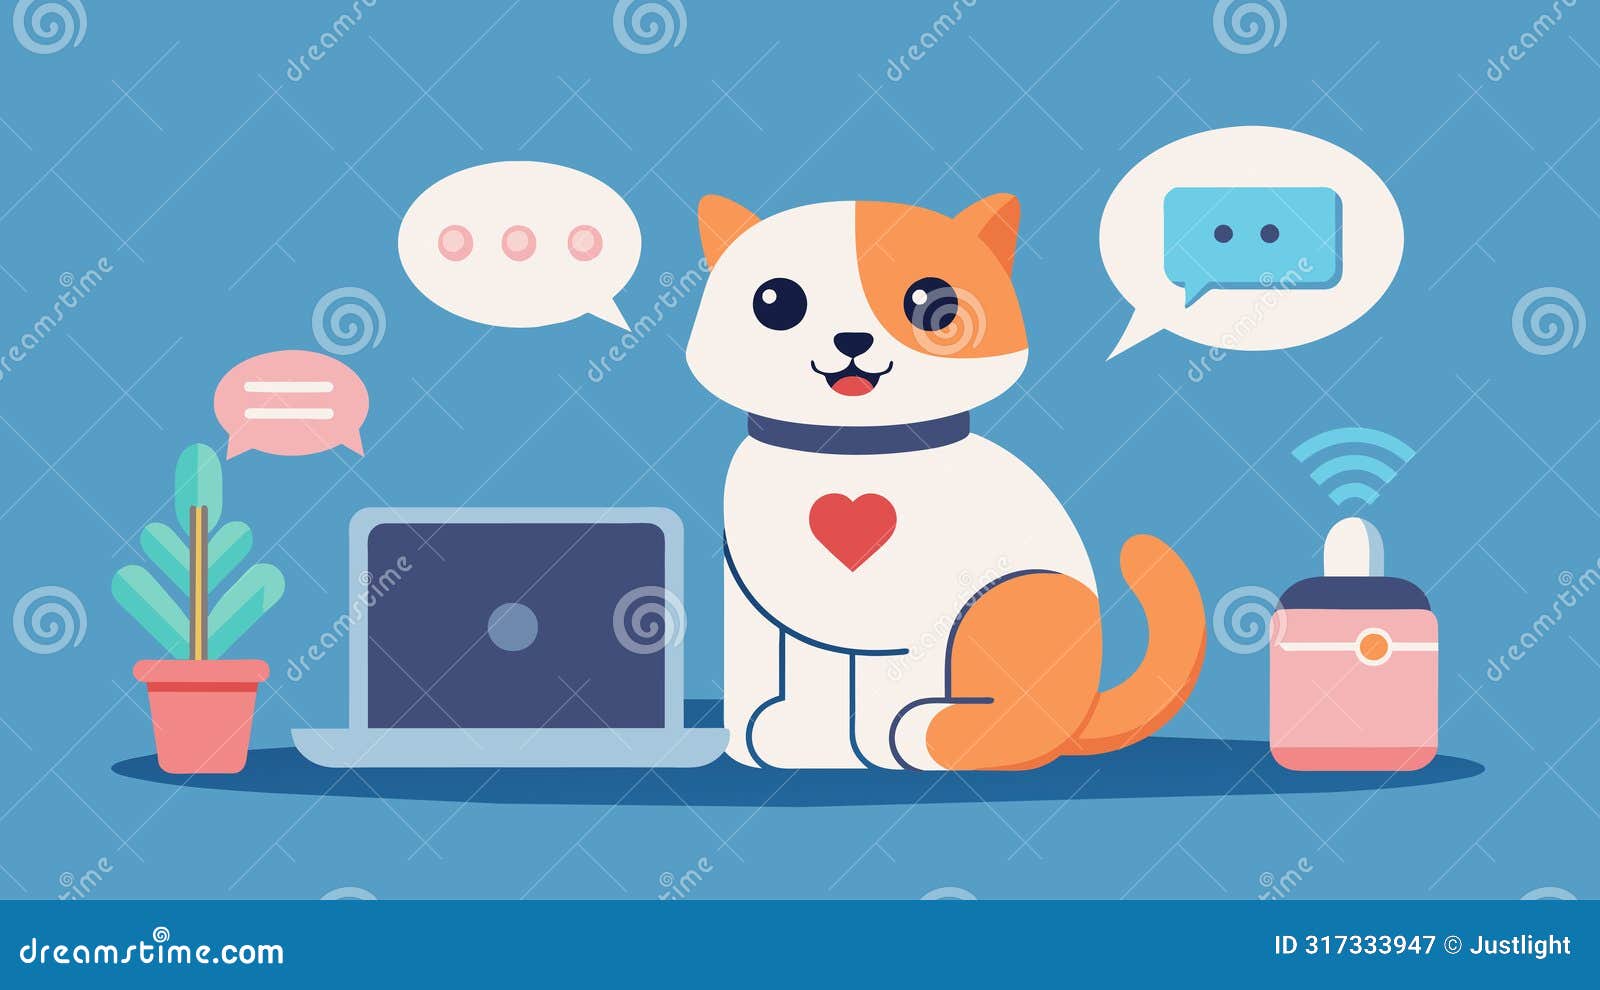 a virtual pet nanny that can communicate with your pet in their own language making them feel less lonely when youre out